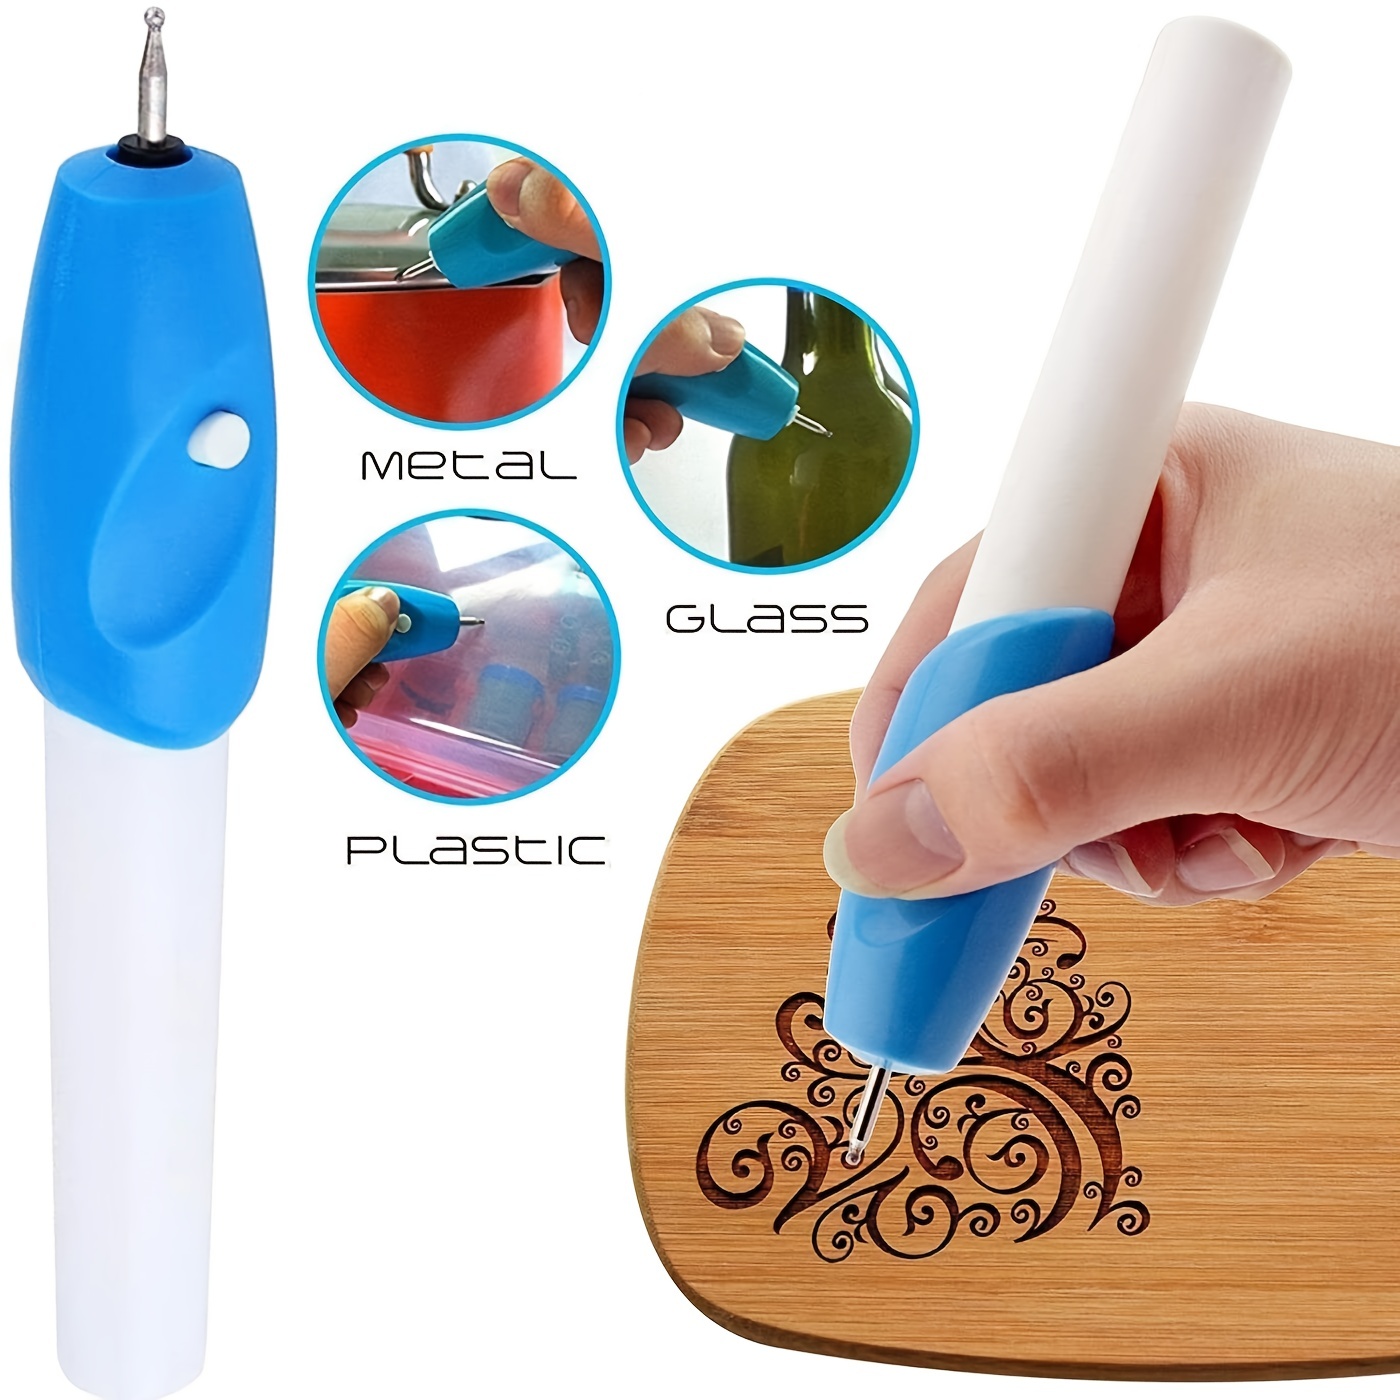 Engraving Pen with LED Light,USB Rechargeable Engraver Pen with